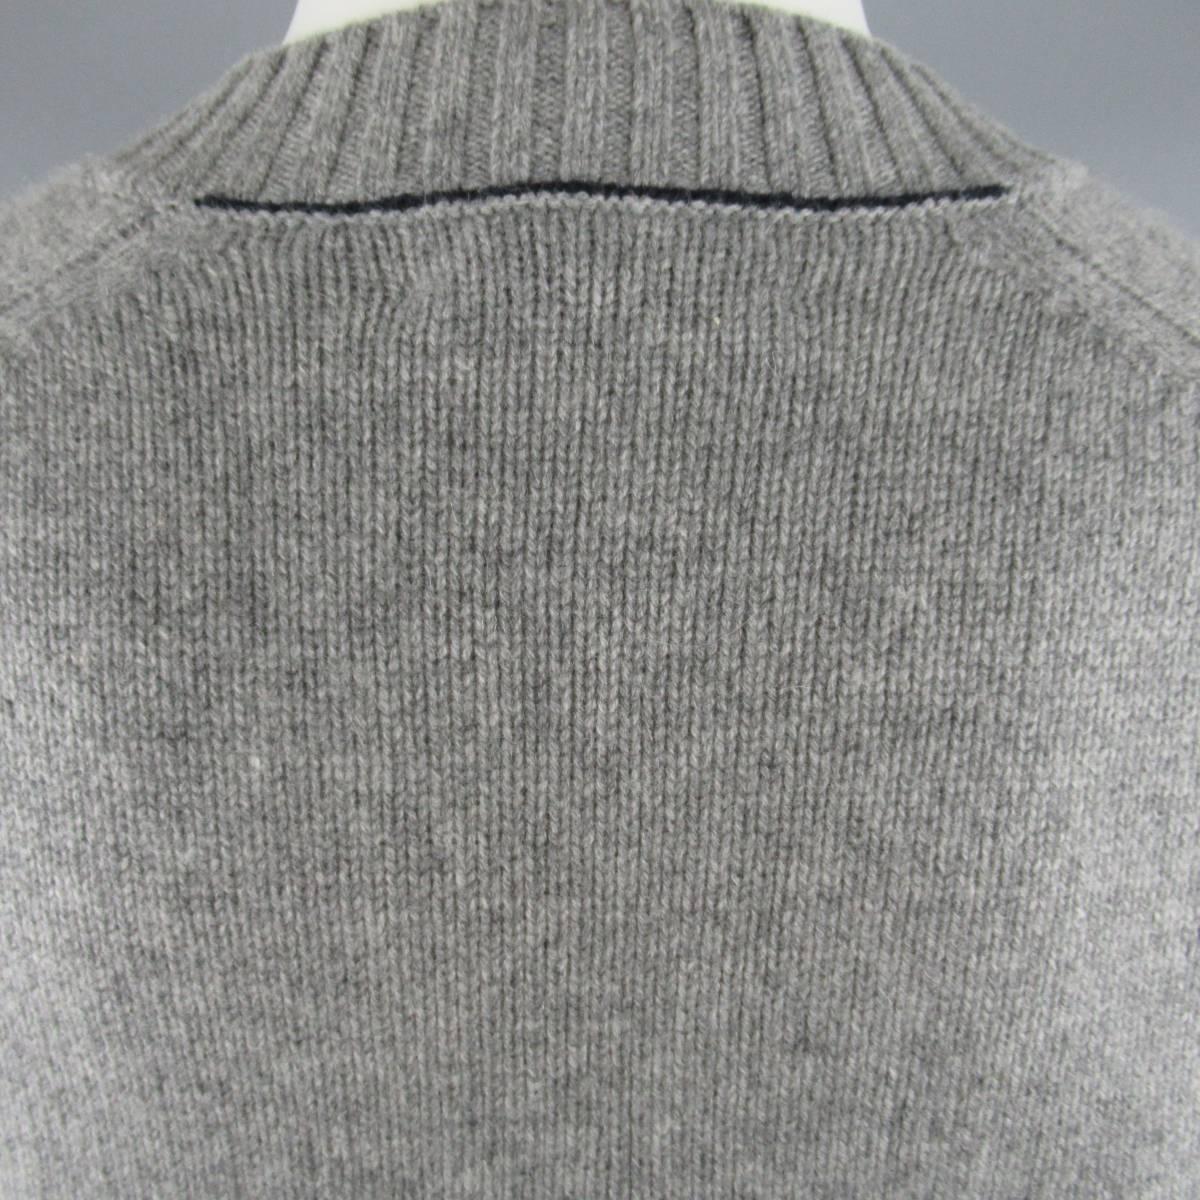 Men's BRUNELLO CUCINELLI Size XS Grey Knitted Cashmere V Neck Sweater 2